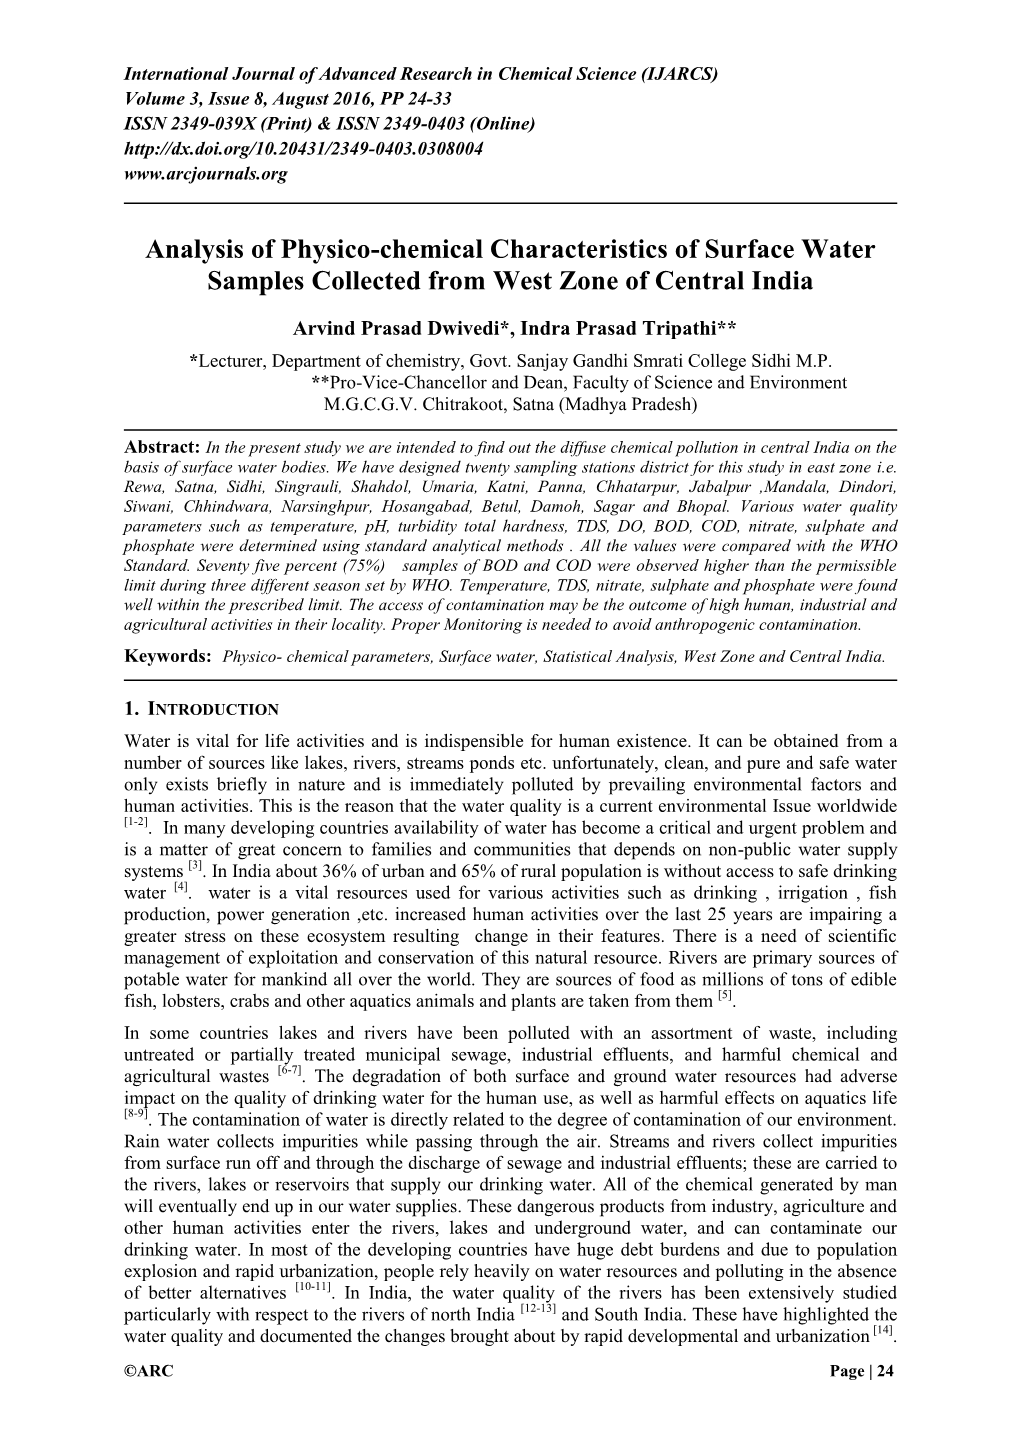 Analysis of Physico-Chemical Characteristics of Surface Water Samples Collected from West Zone of Central India